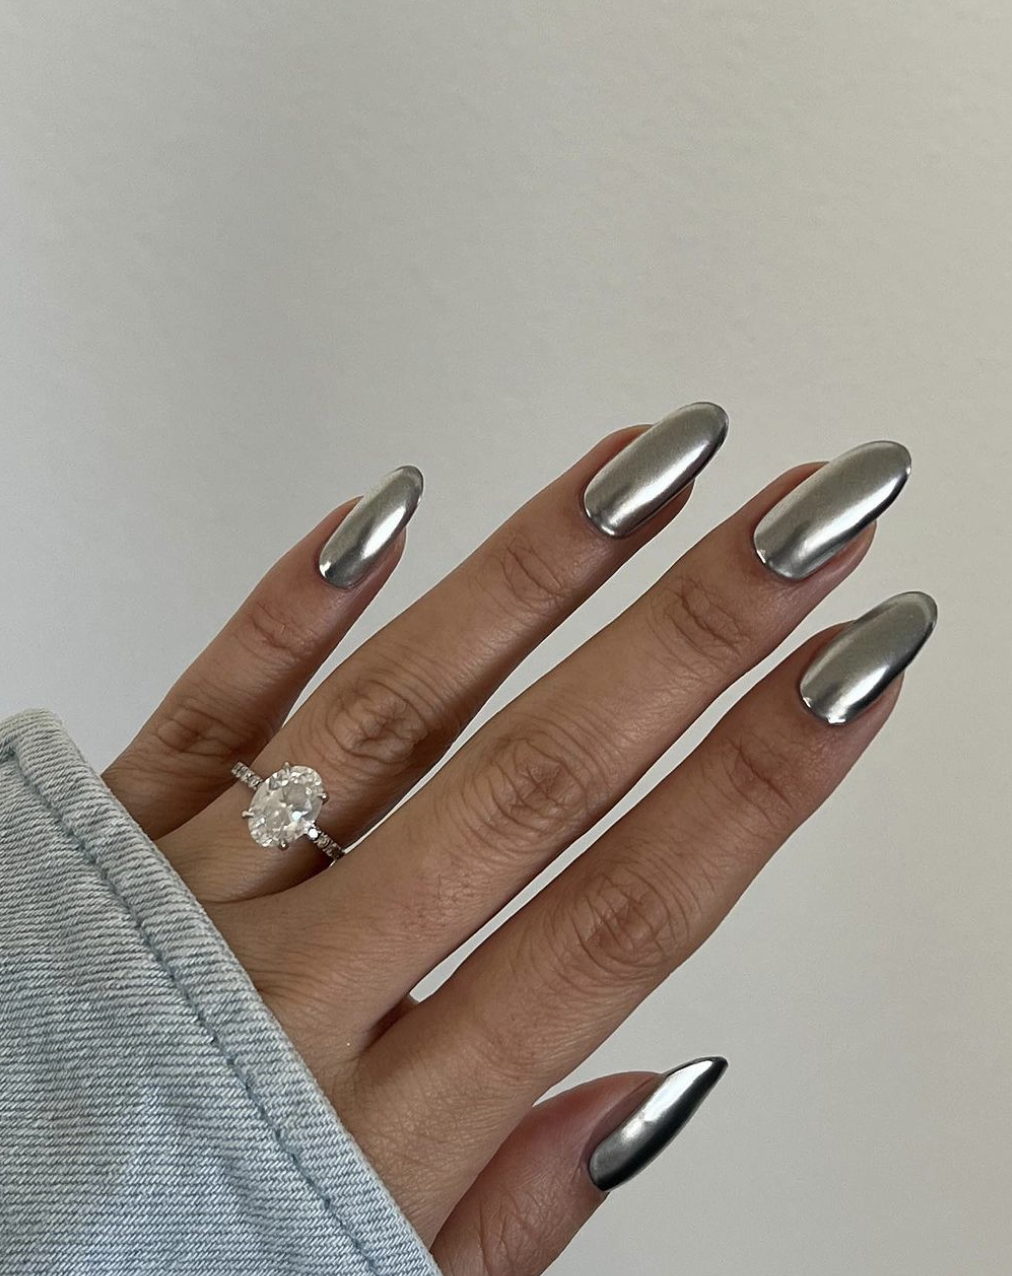 Chrome nails are back in trend